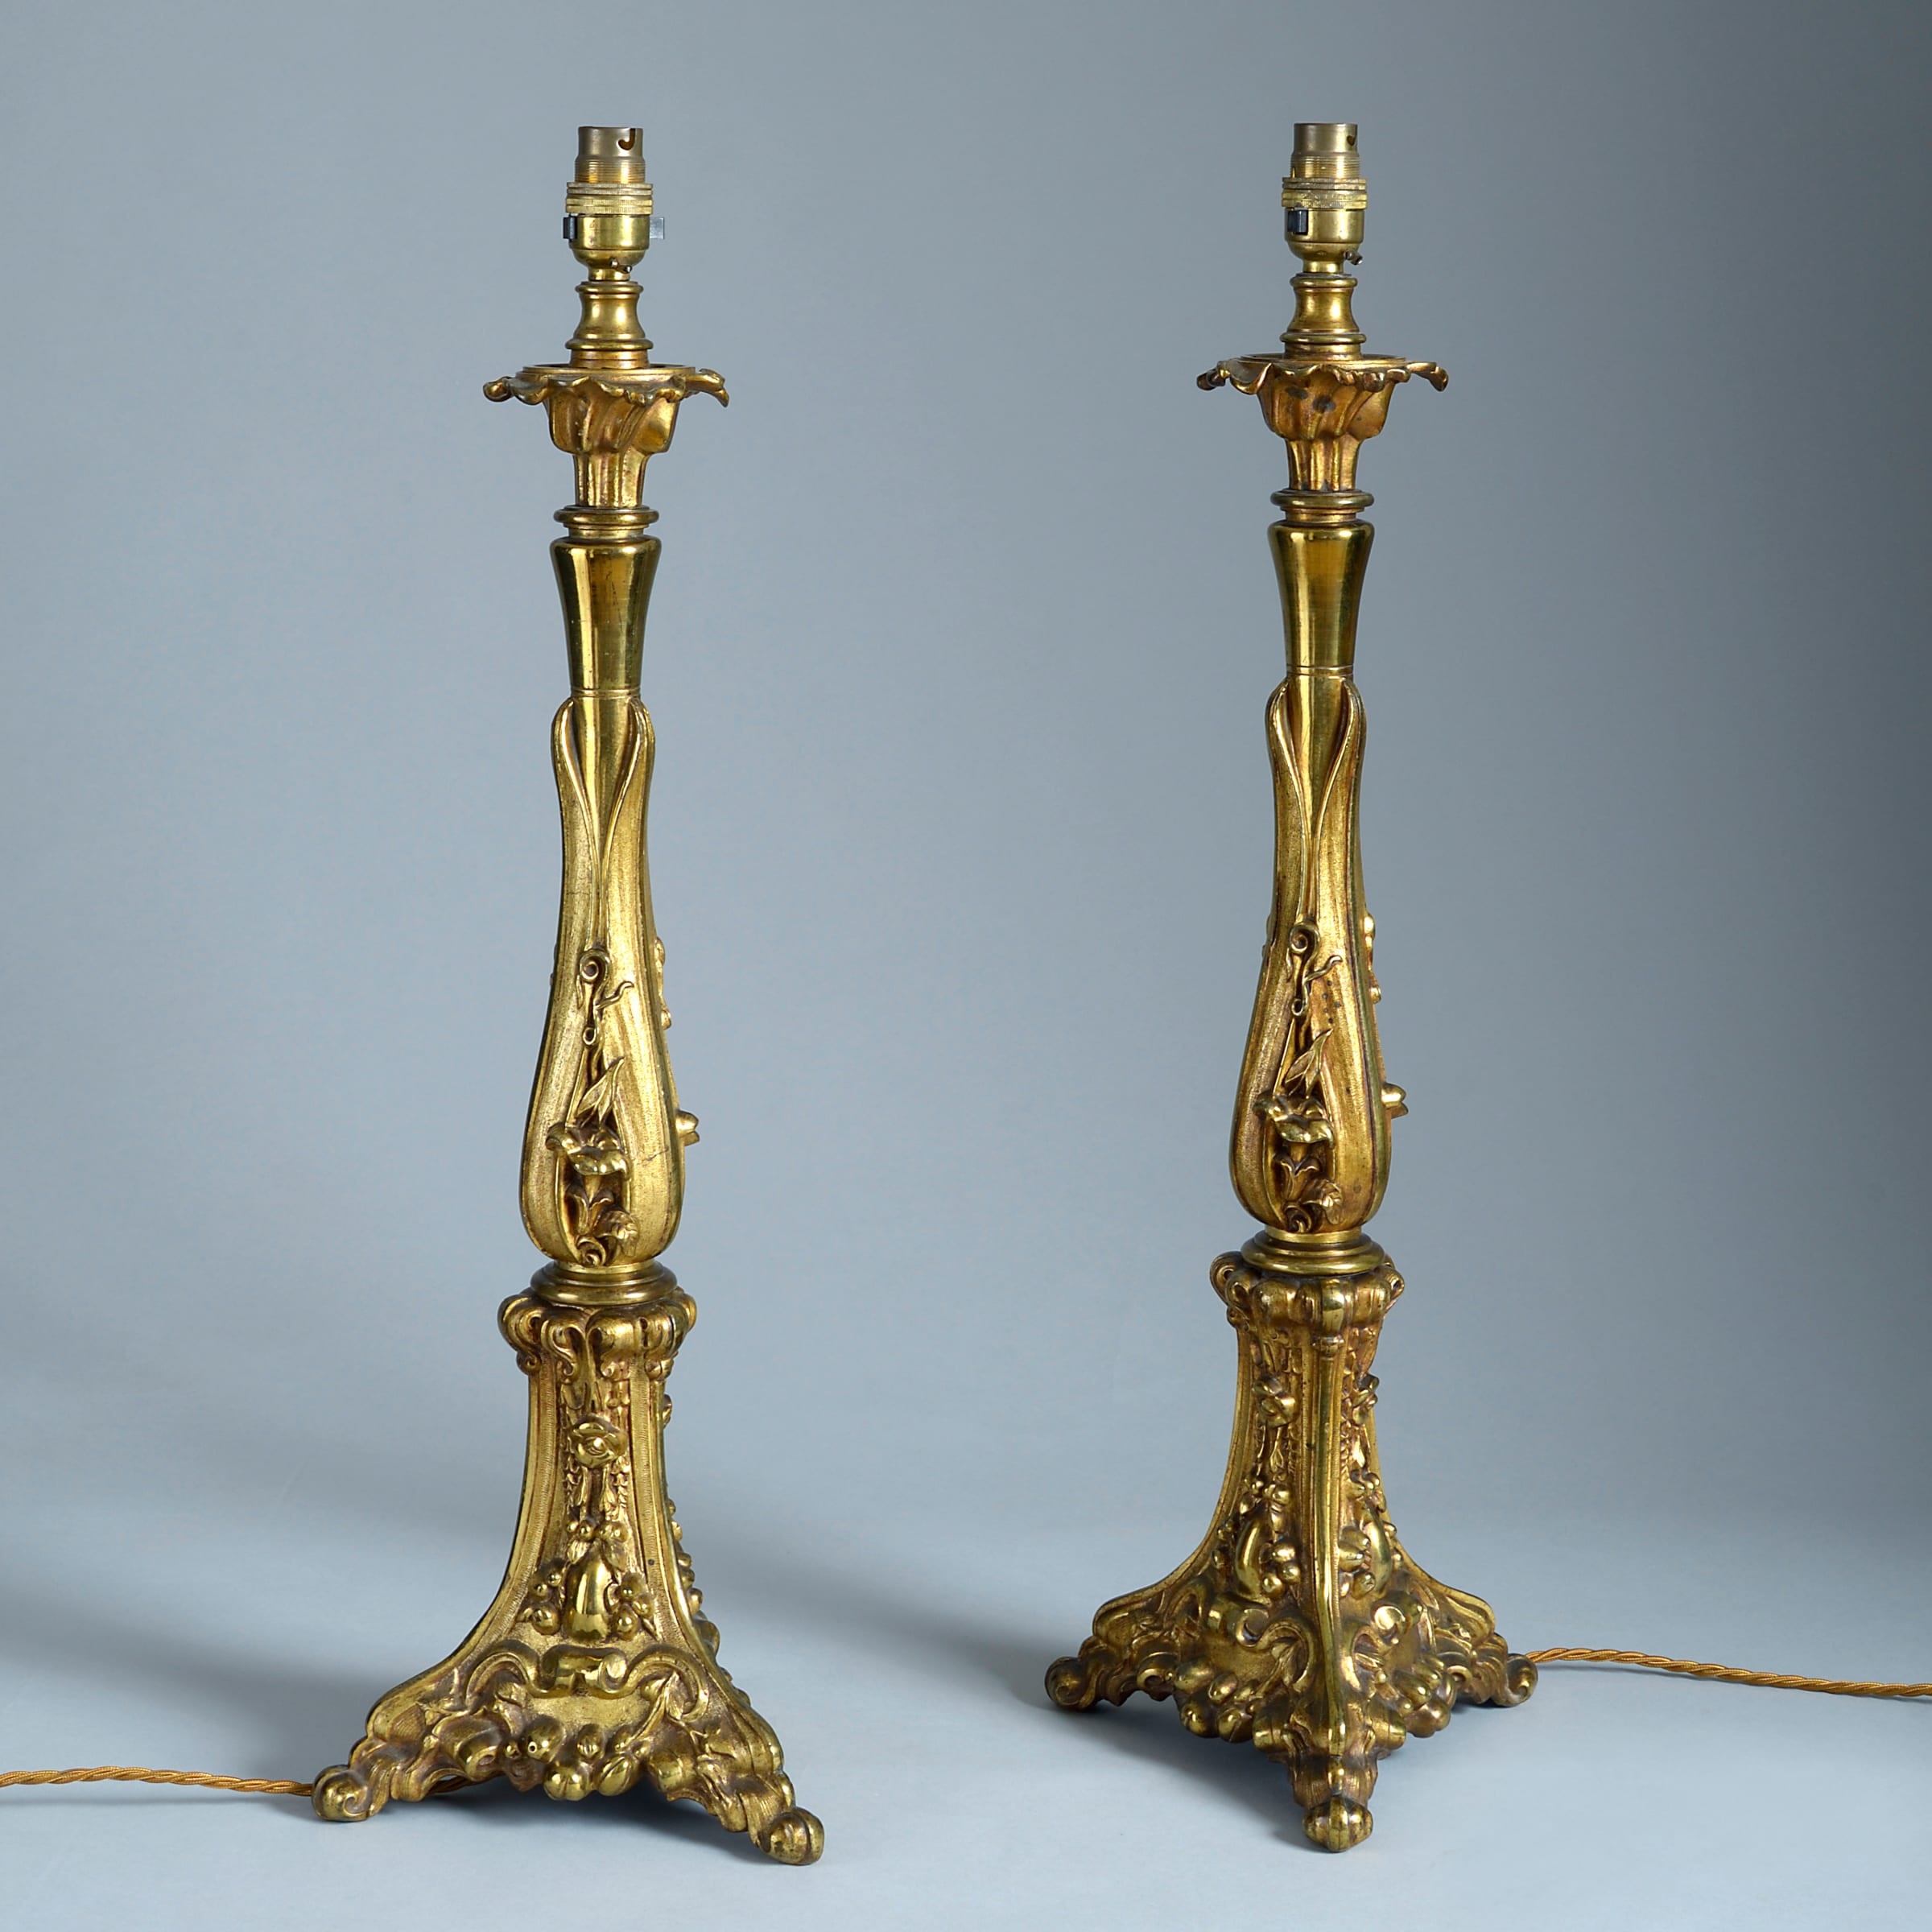 PAIR OF VICTORIAN LACQUERED BRASS TABLE LAMPS